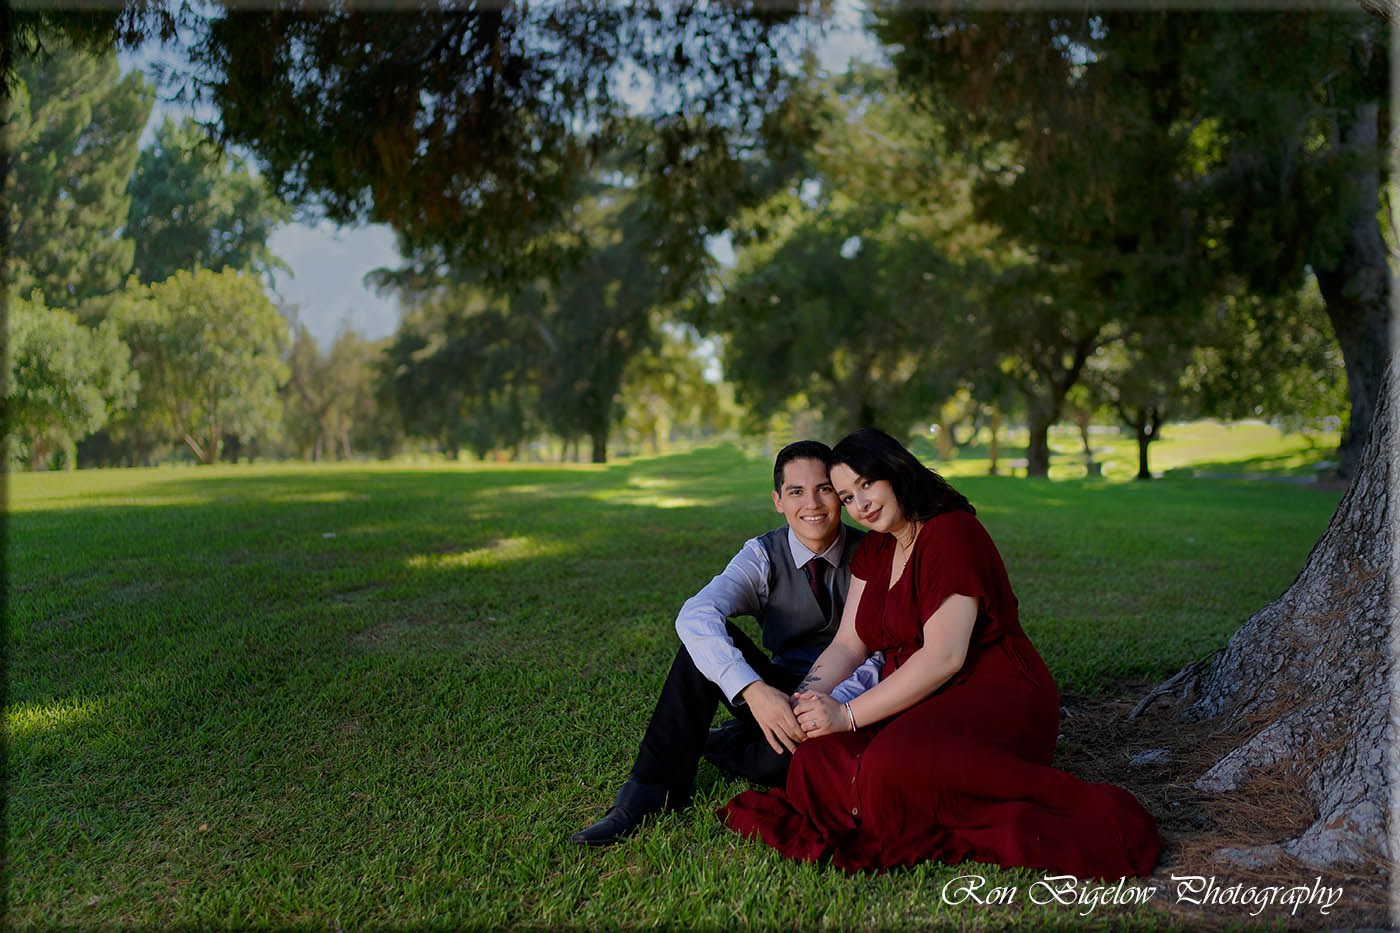 Ron Bigelow Photography - Engagement Image 1